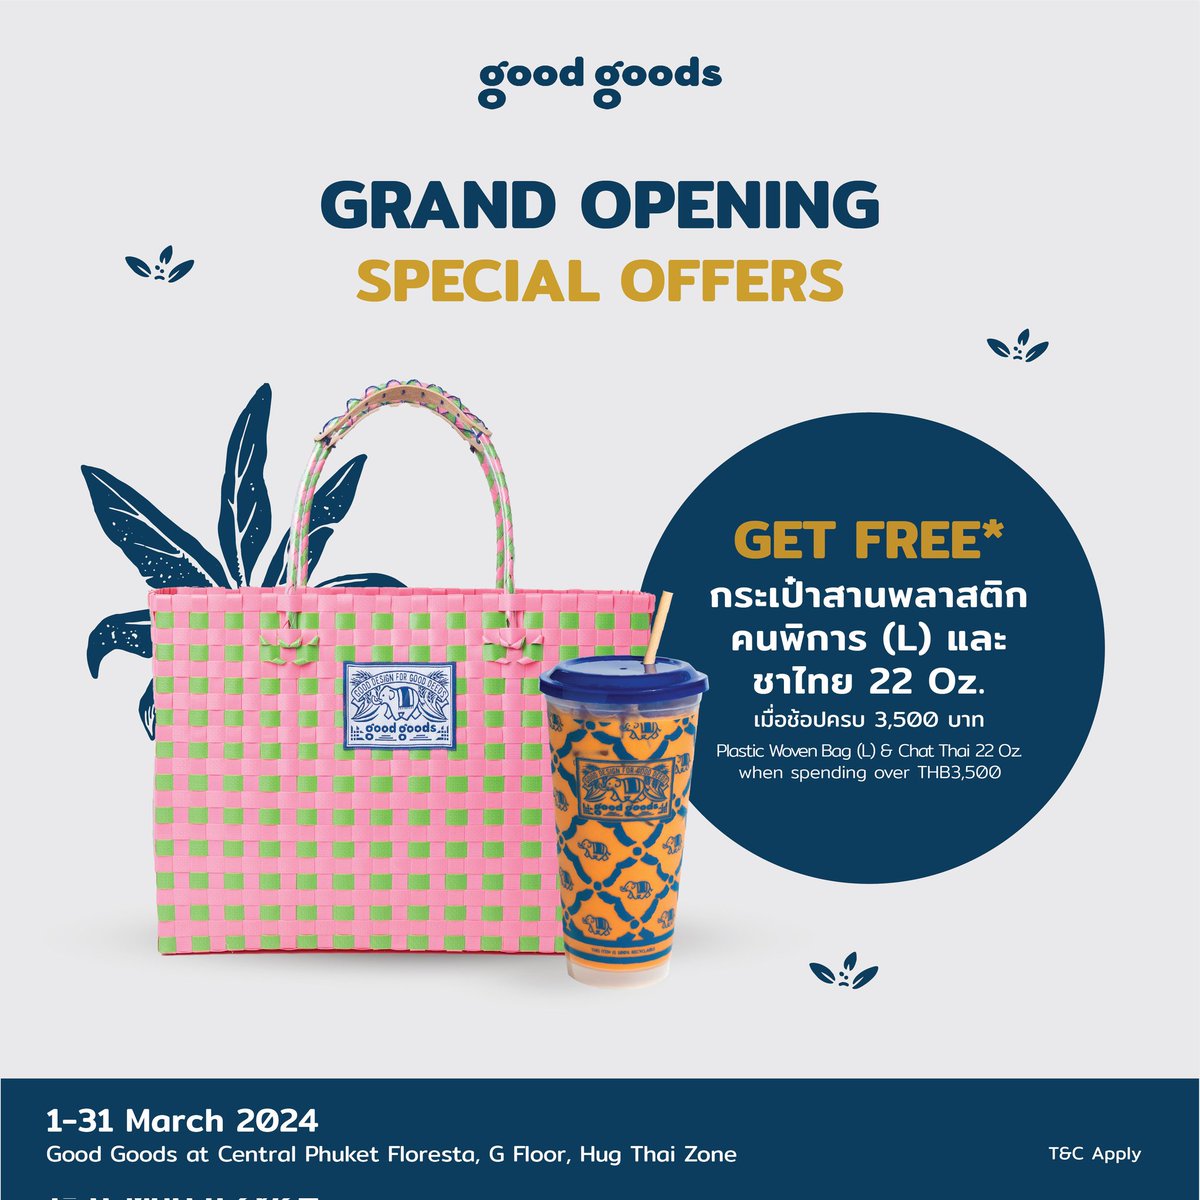 🎉 New flagship store grand opening offers #goodgoods 
#aboutgoodgoods
#gooddesignforgooddeeds
#supportlocal
#LocalCraft
#ThaiCraft
#supporthandmade
#communityproduct
#souvenir #gift #present
#CentralPhuket #Phuket #Thailand

🎉 Discover exclusive grand opening offers at the new